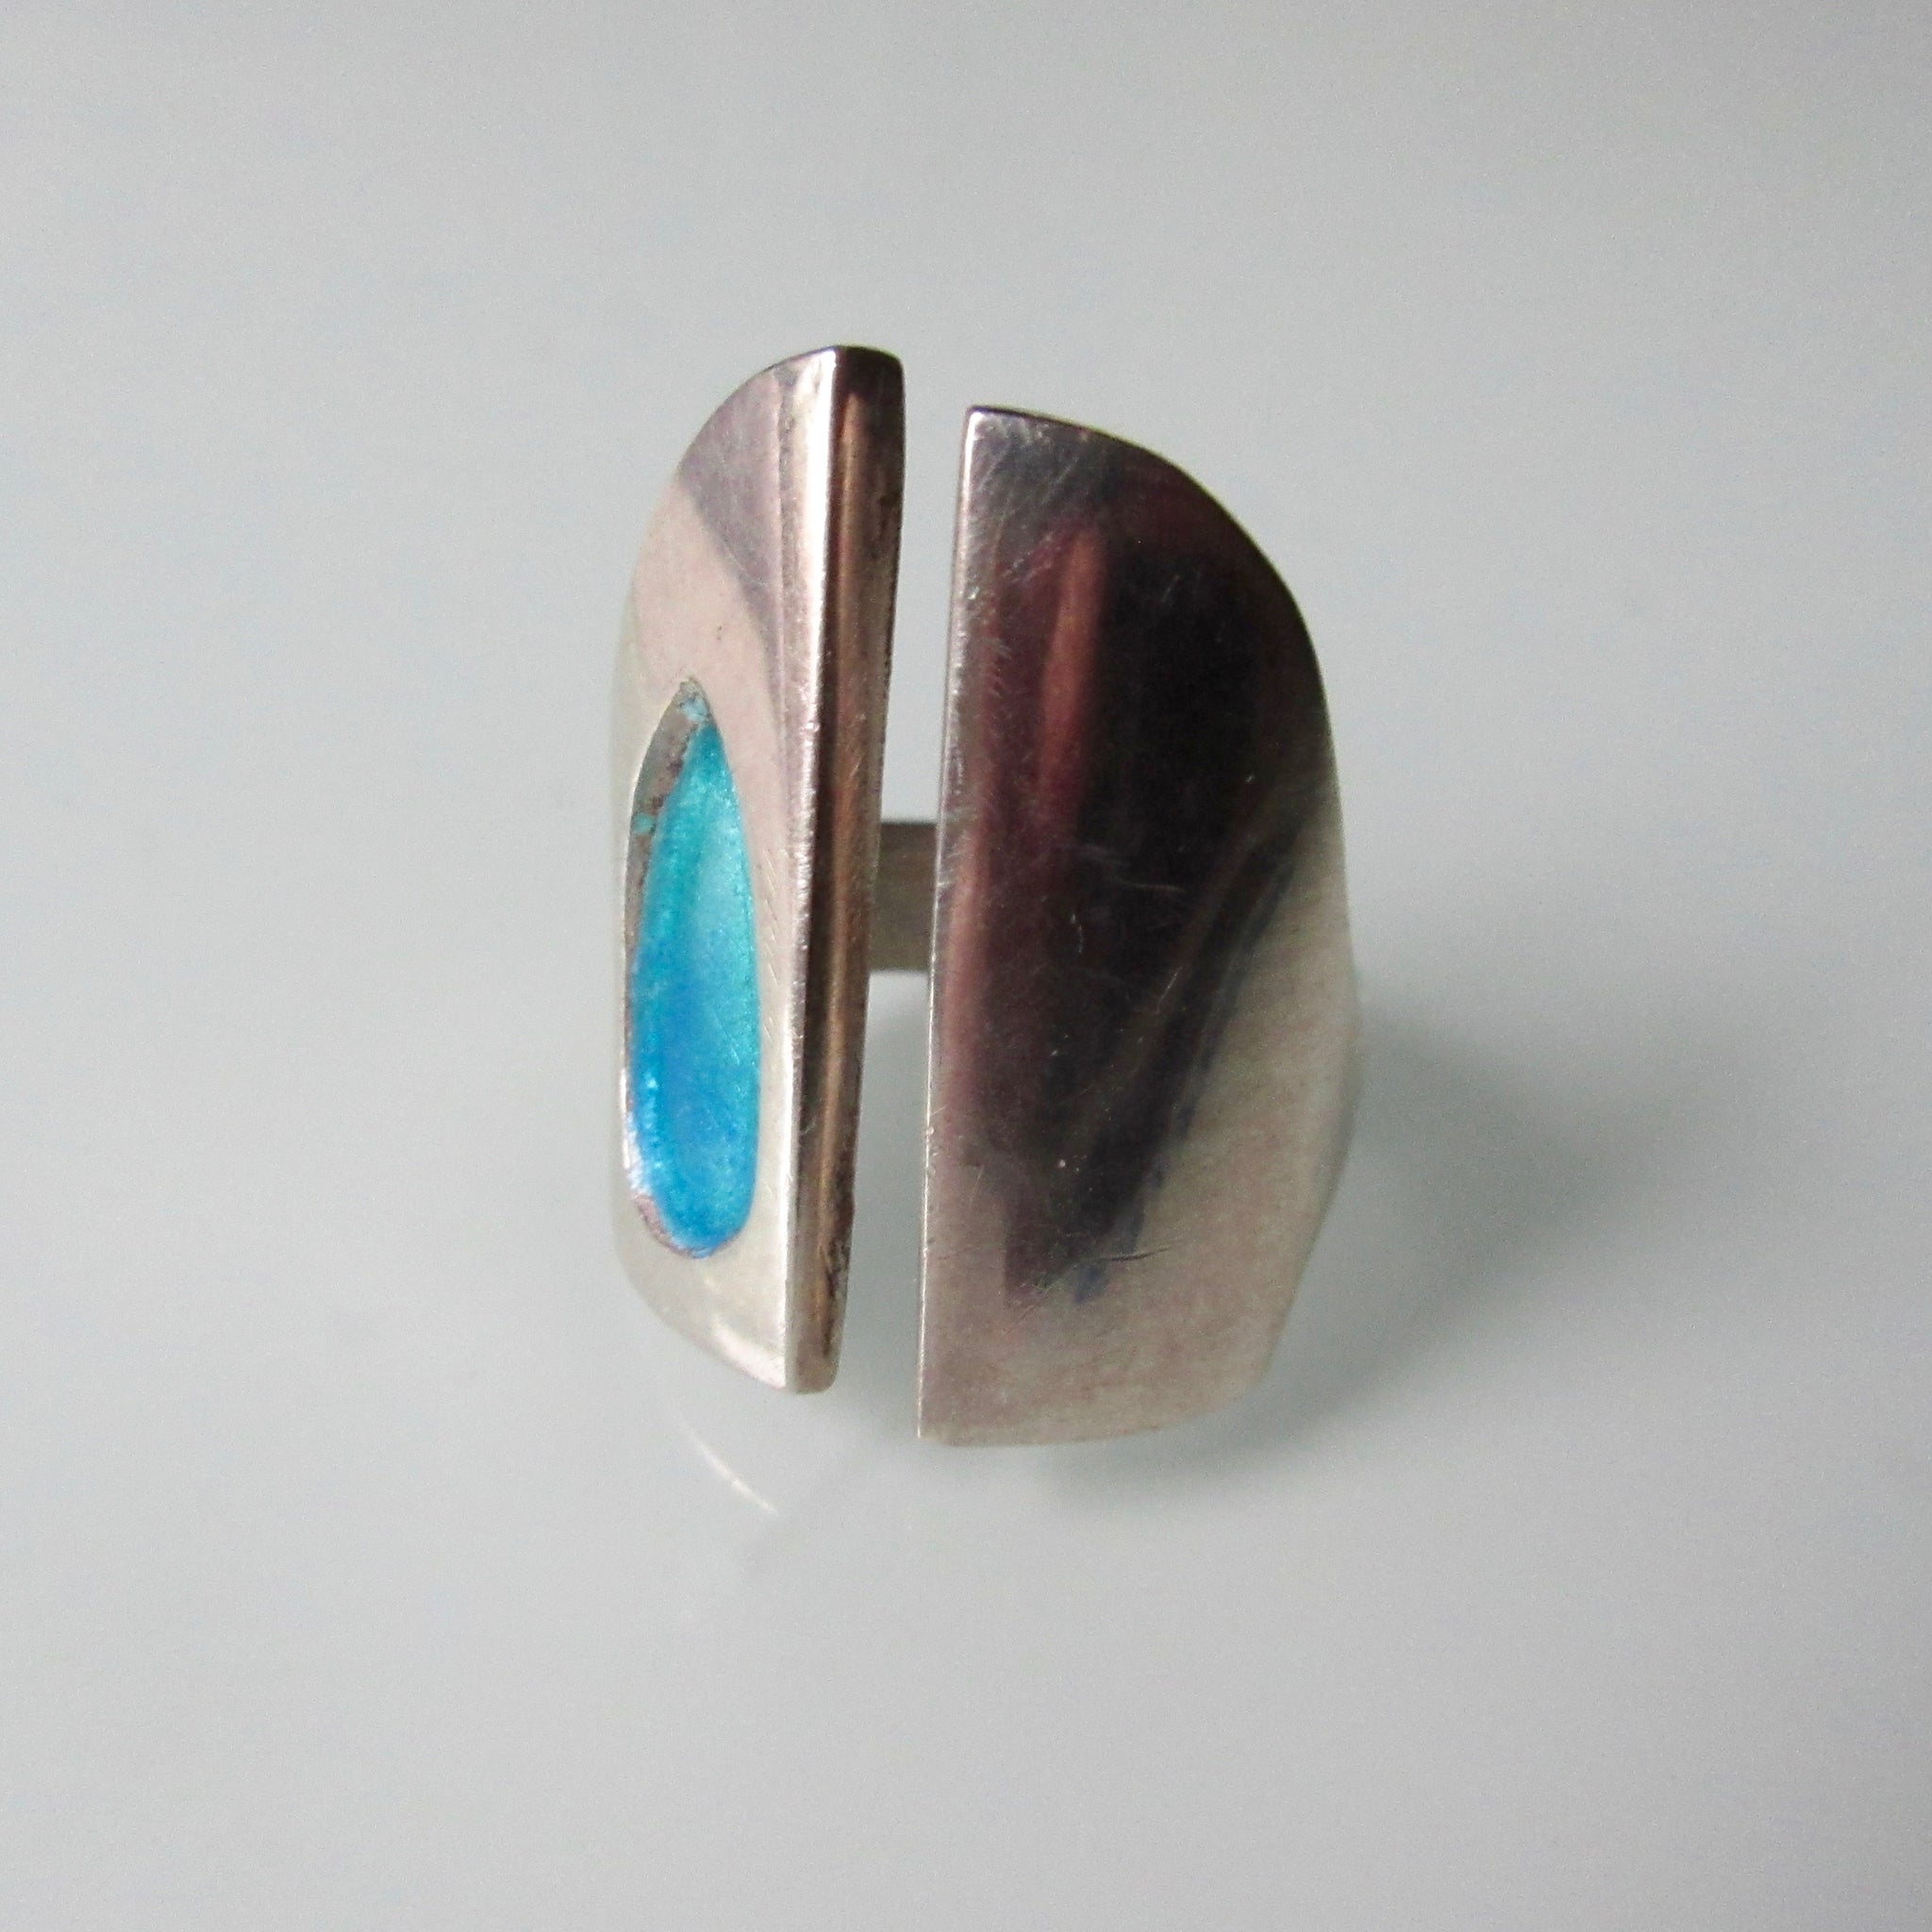 Mid Century Modern Ring With Enamel Inset